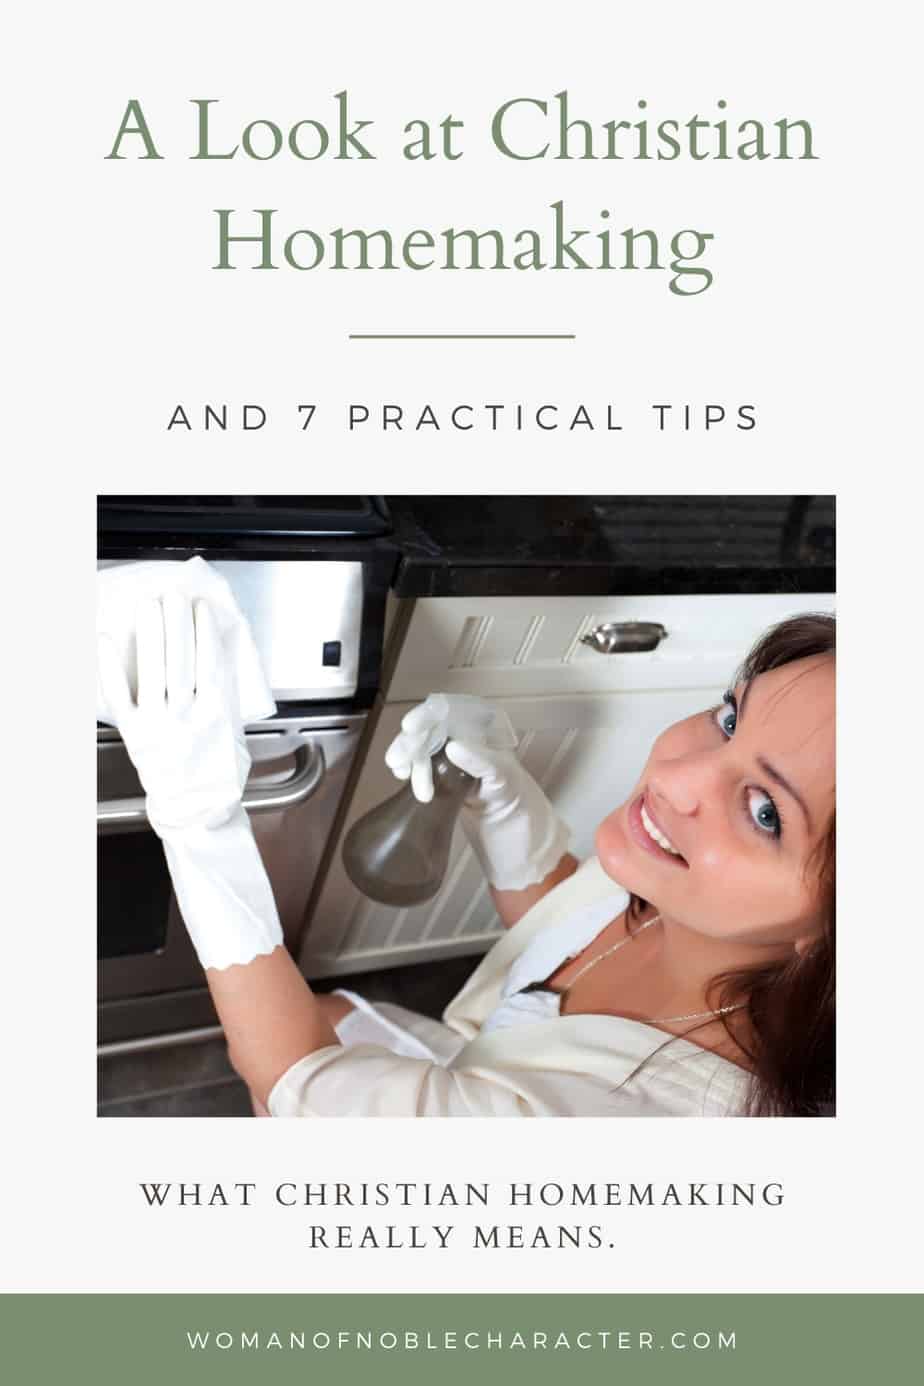 image of smiling woman cleaning stove with text A Look at Christian Homemaking and 7 Practical Tips